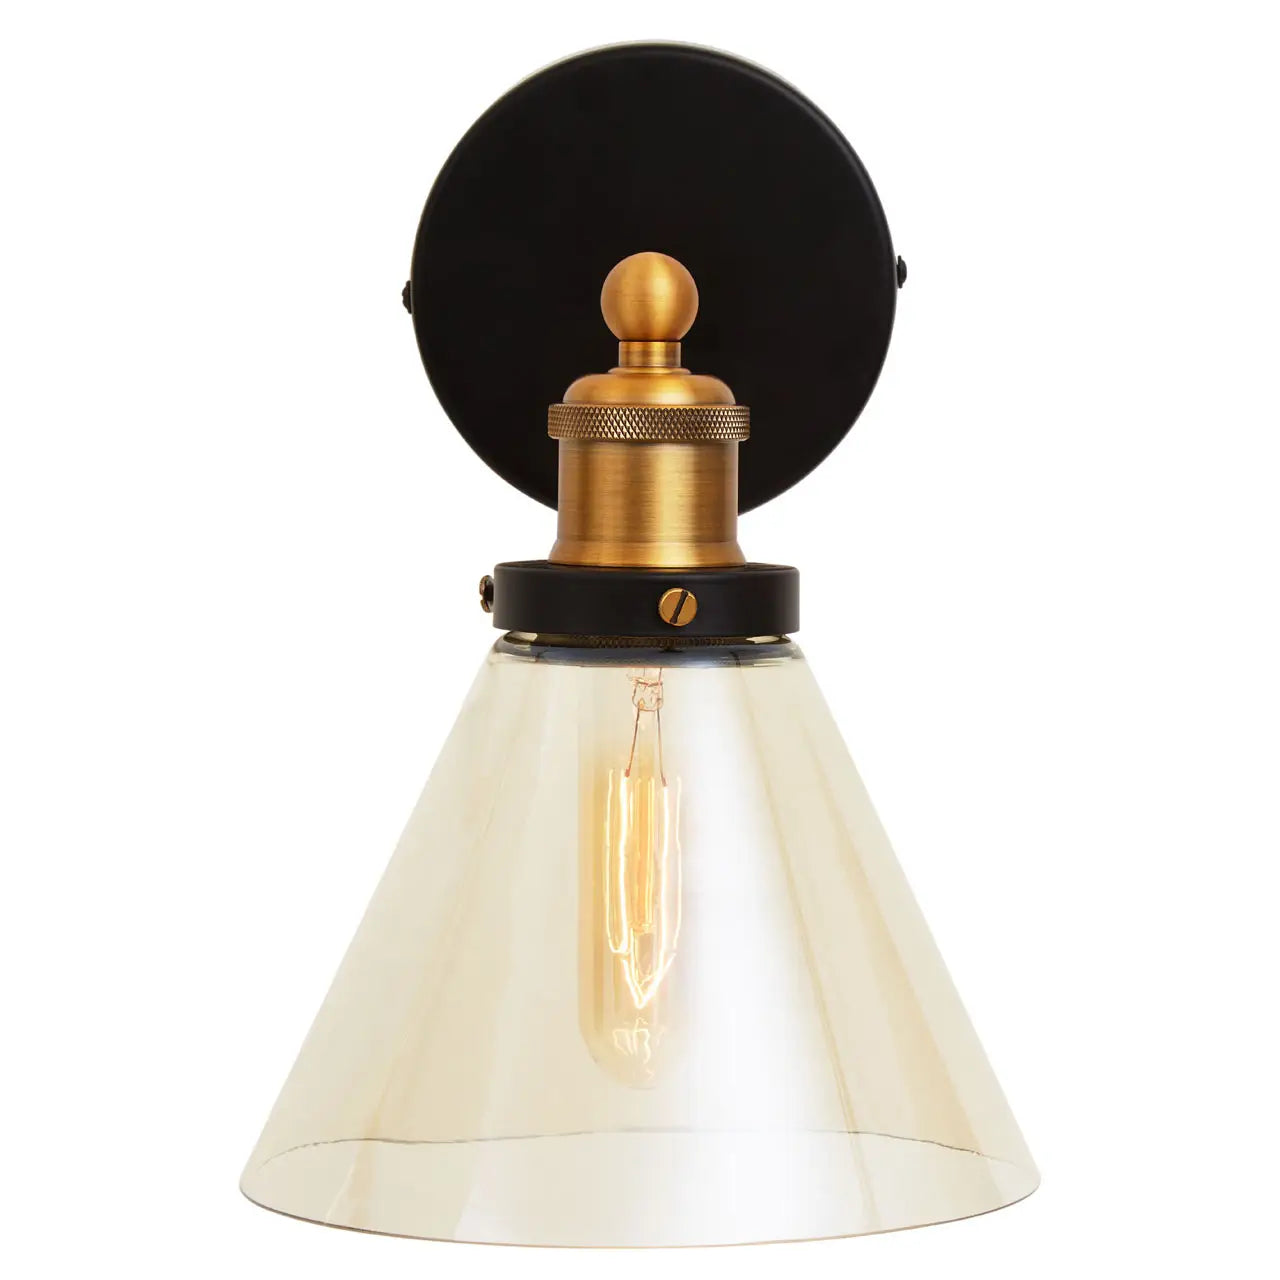 Black and gold wall light  Black and gold Sconce  cone wall sconce  cone wall light  brass wall sconce  brass wall light  gold wall sconce  gold wall light  bedside wall sconce  bedside wall light  wall lighting  modern wall light  modern wall sconce  Wall sconce  Wall light